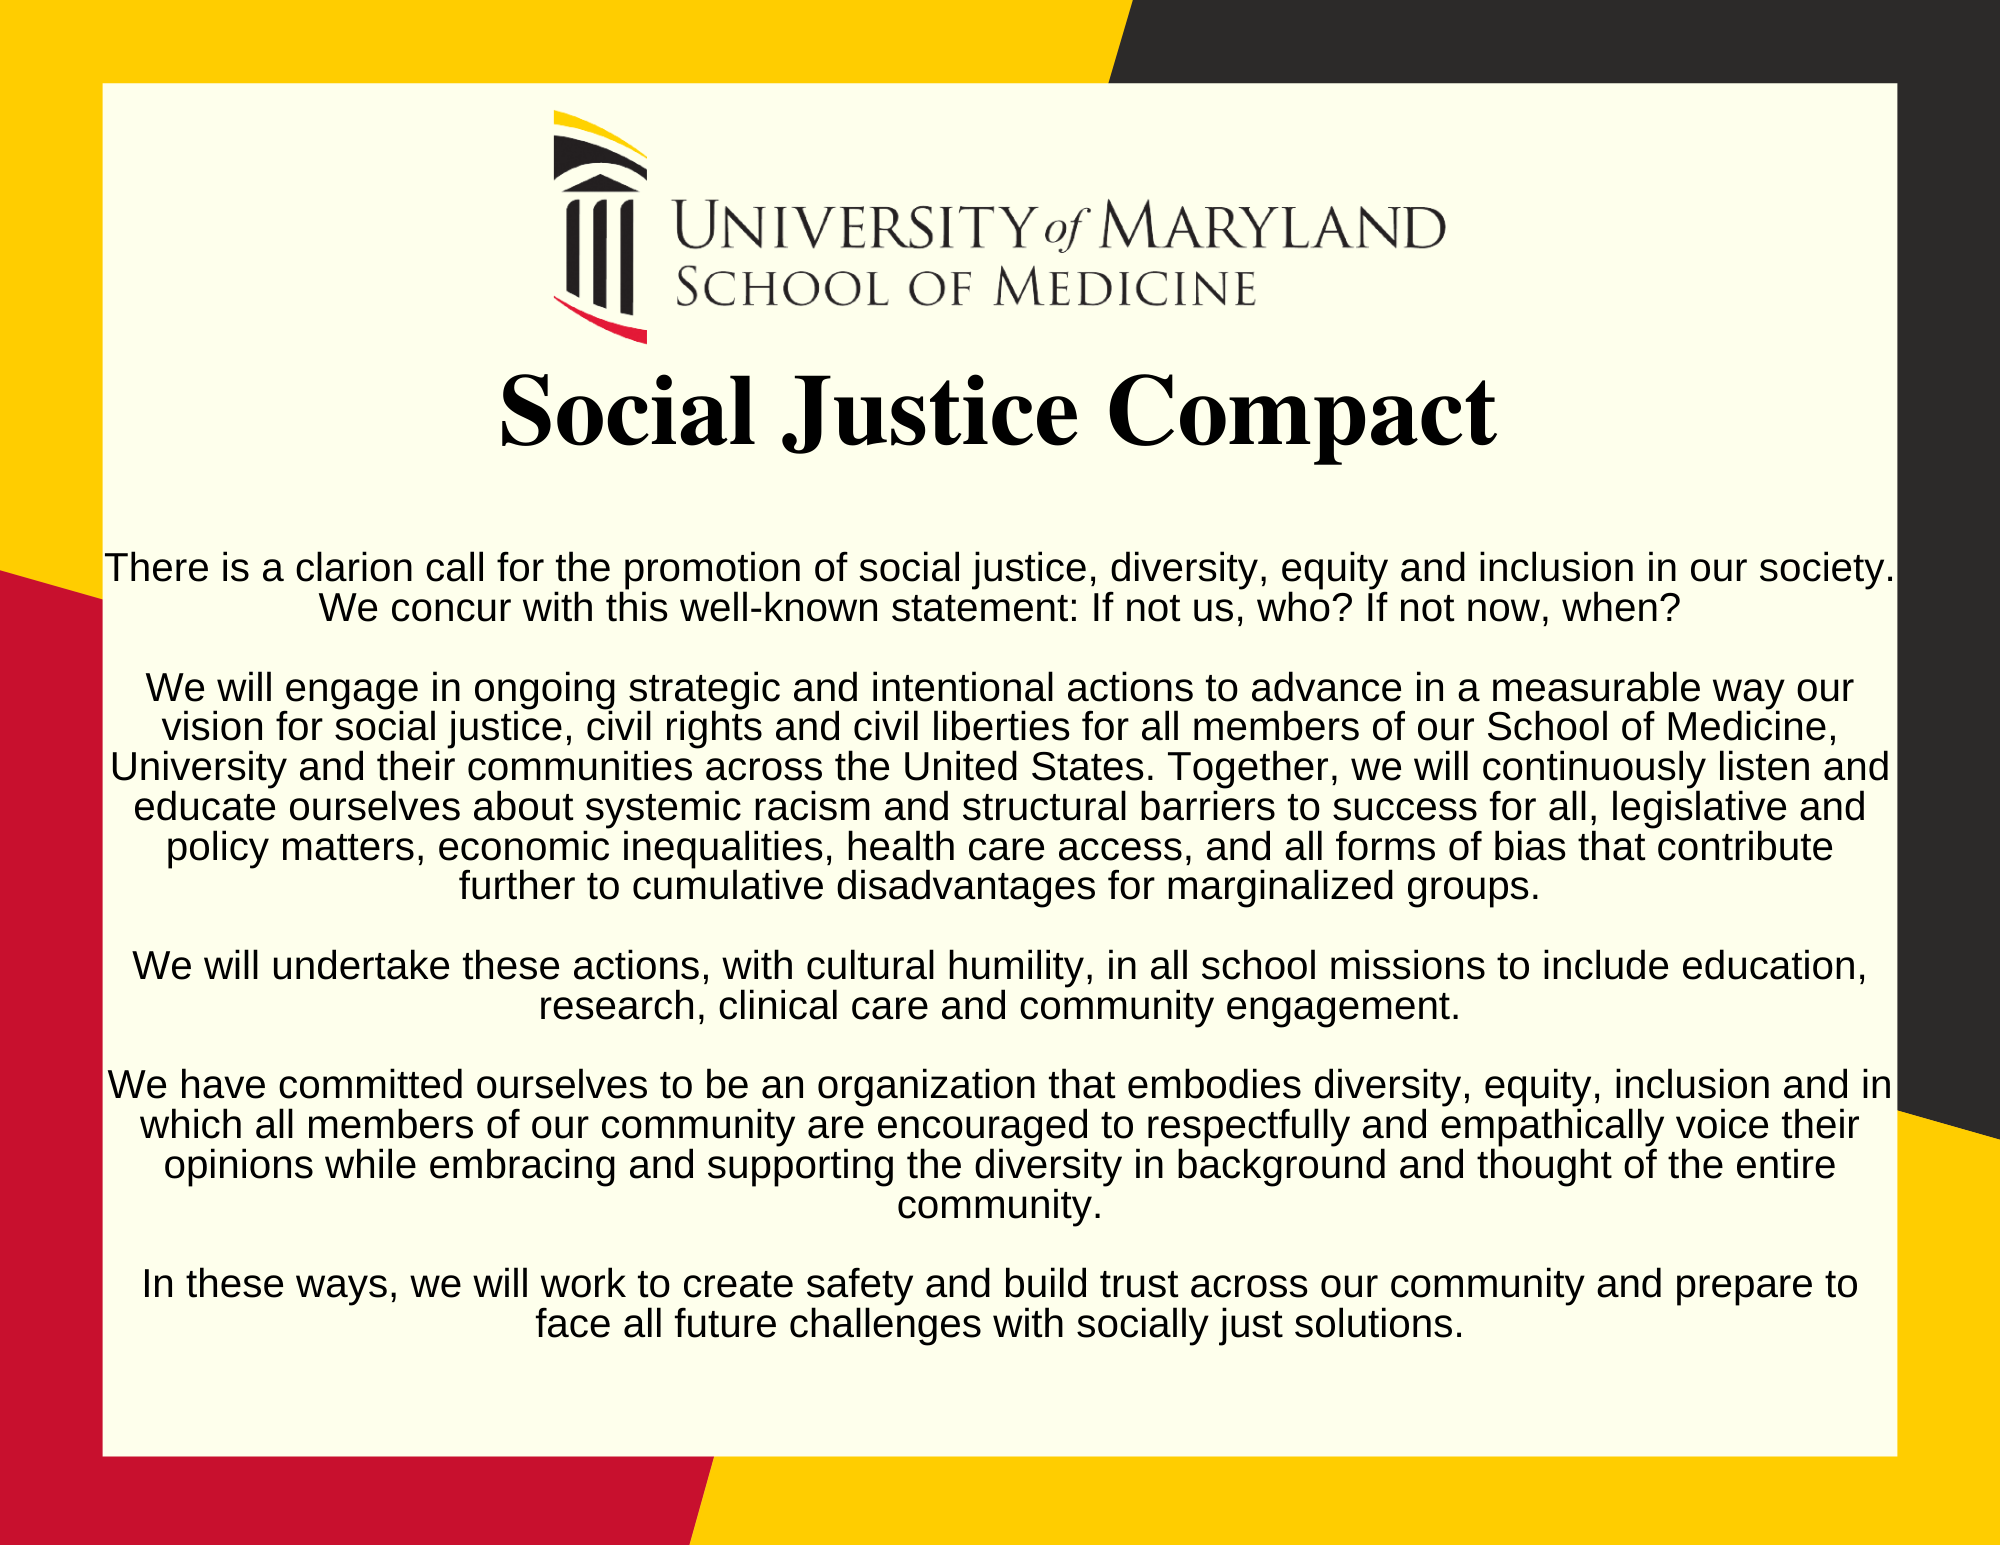 There is a clarion call for the promotion of social justice, diversity, equity and inclusion in our society. We concur with this well-known statement: If not us, who? If not now, when?  We will engage in ongoing strategic and intentional actions to advance in a measurable way our vision for social justice, civil rights and civil liberties for all members of our School of Medicine, University and t